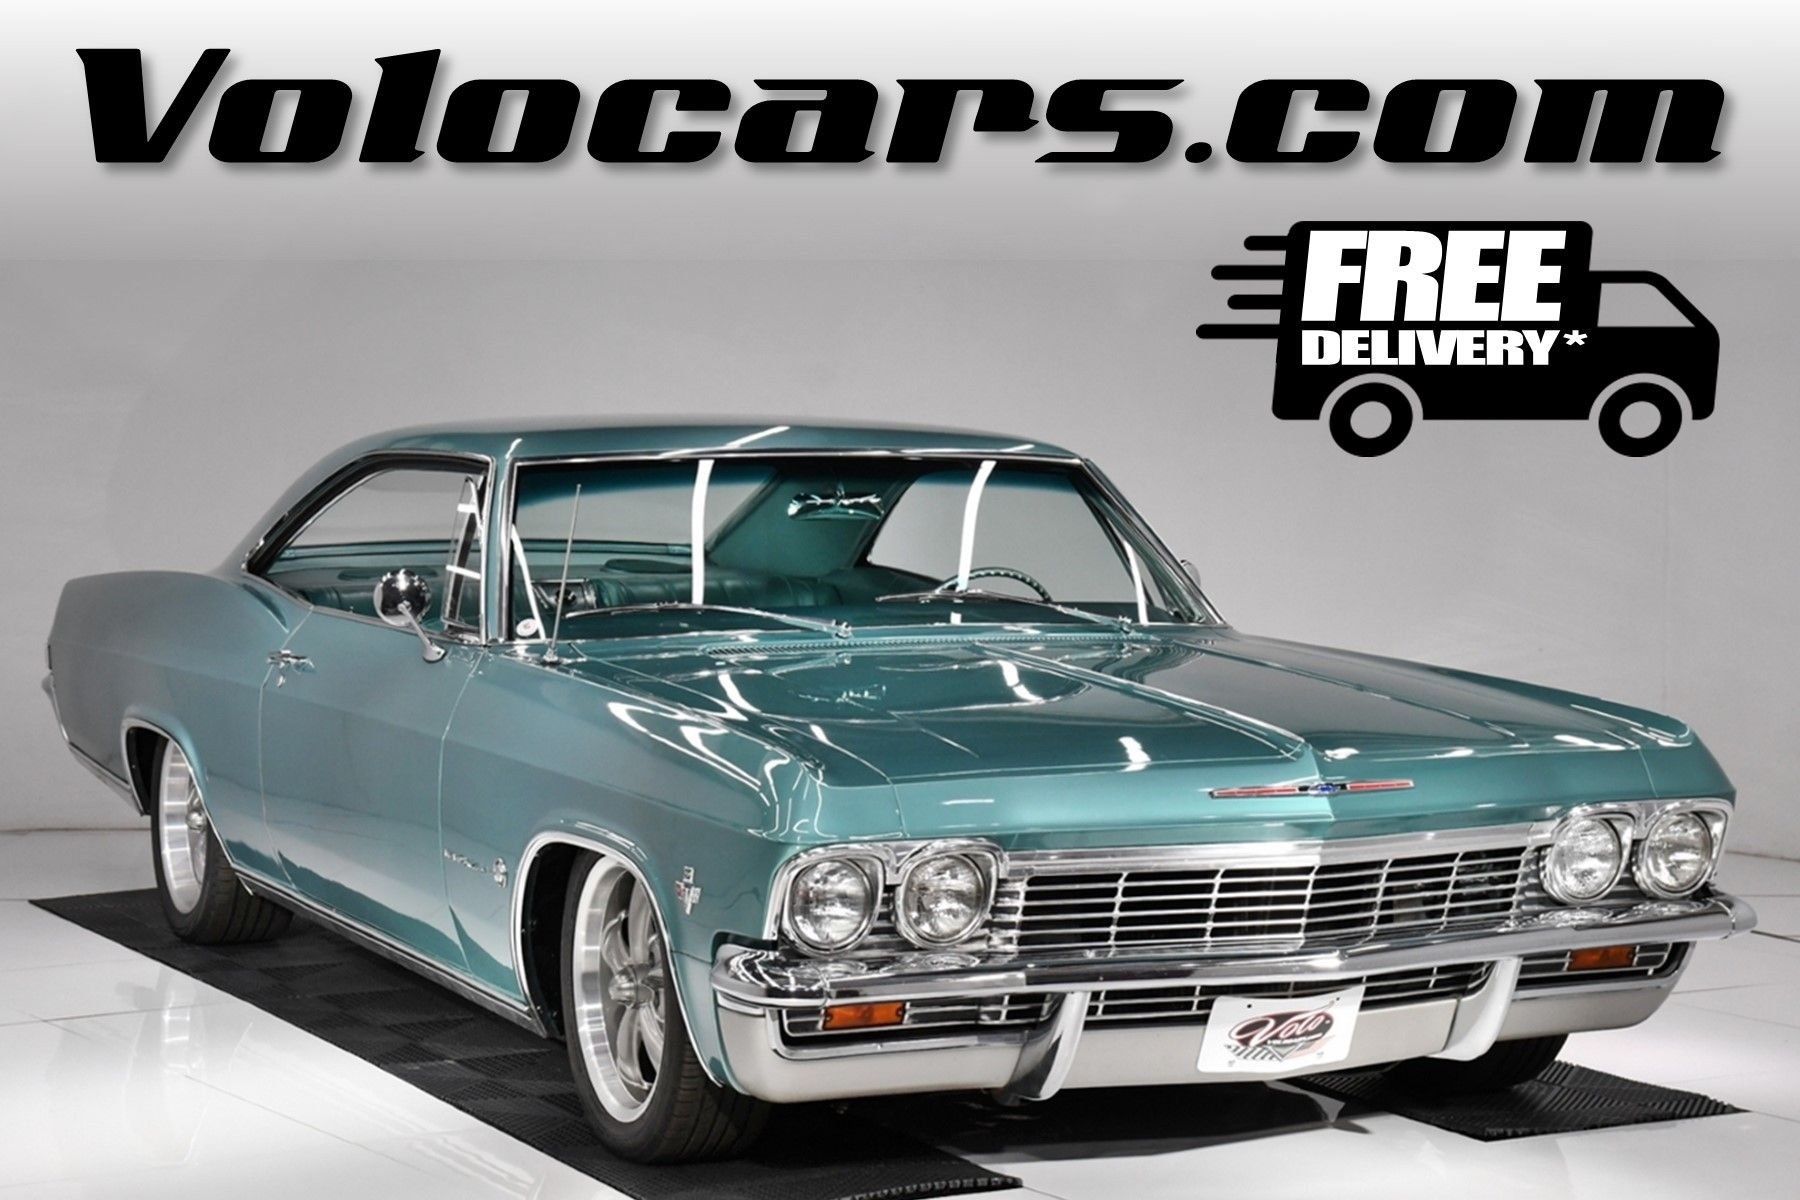 1965 Chevrolet Impala SS New Metal Sign Fully Restored 